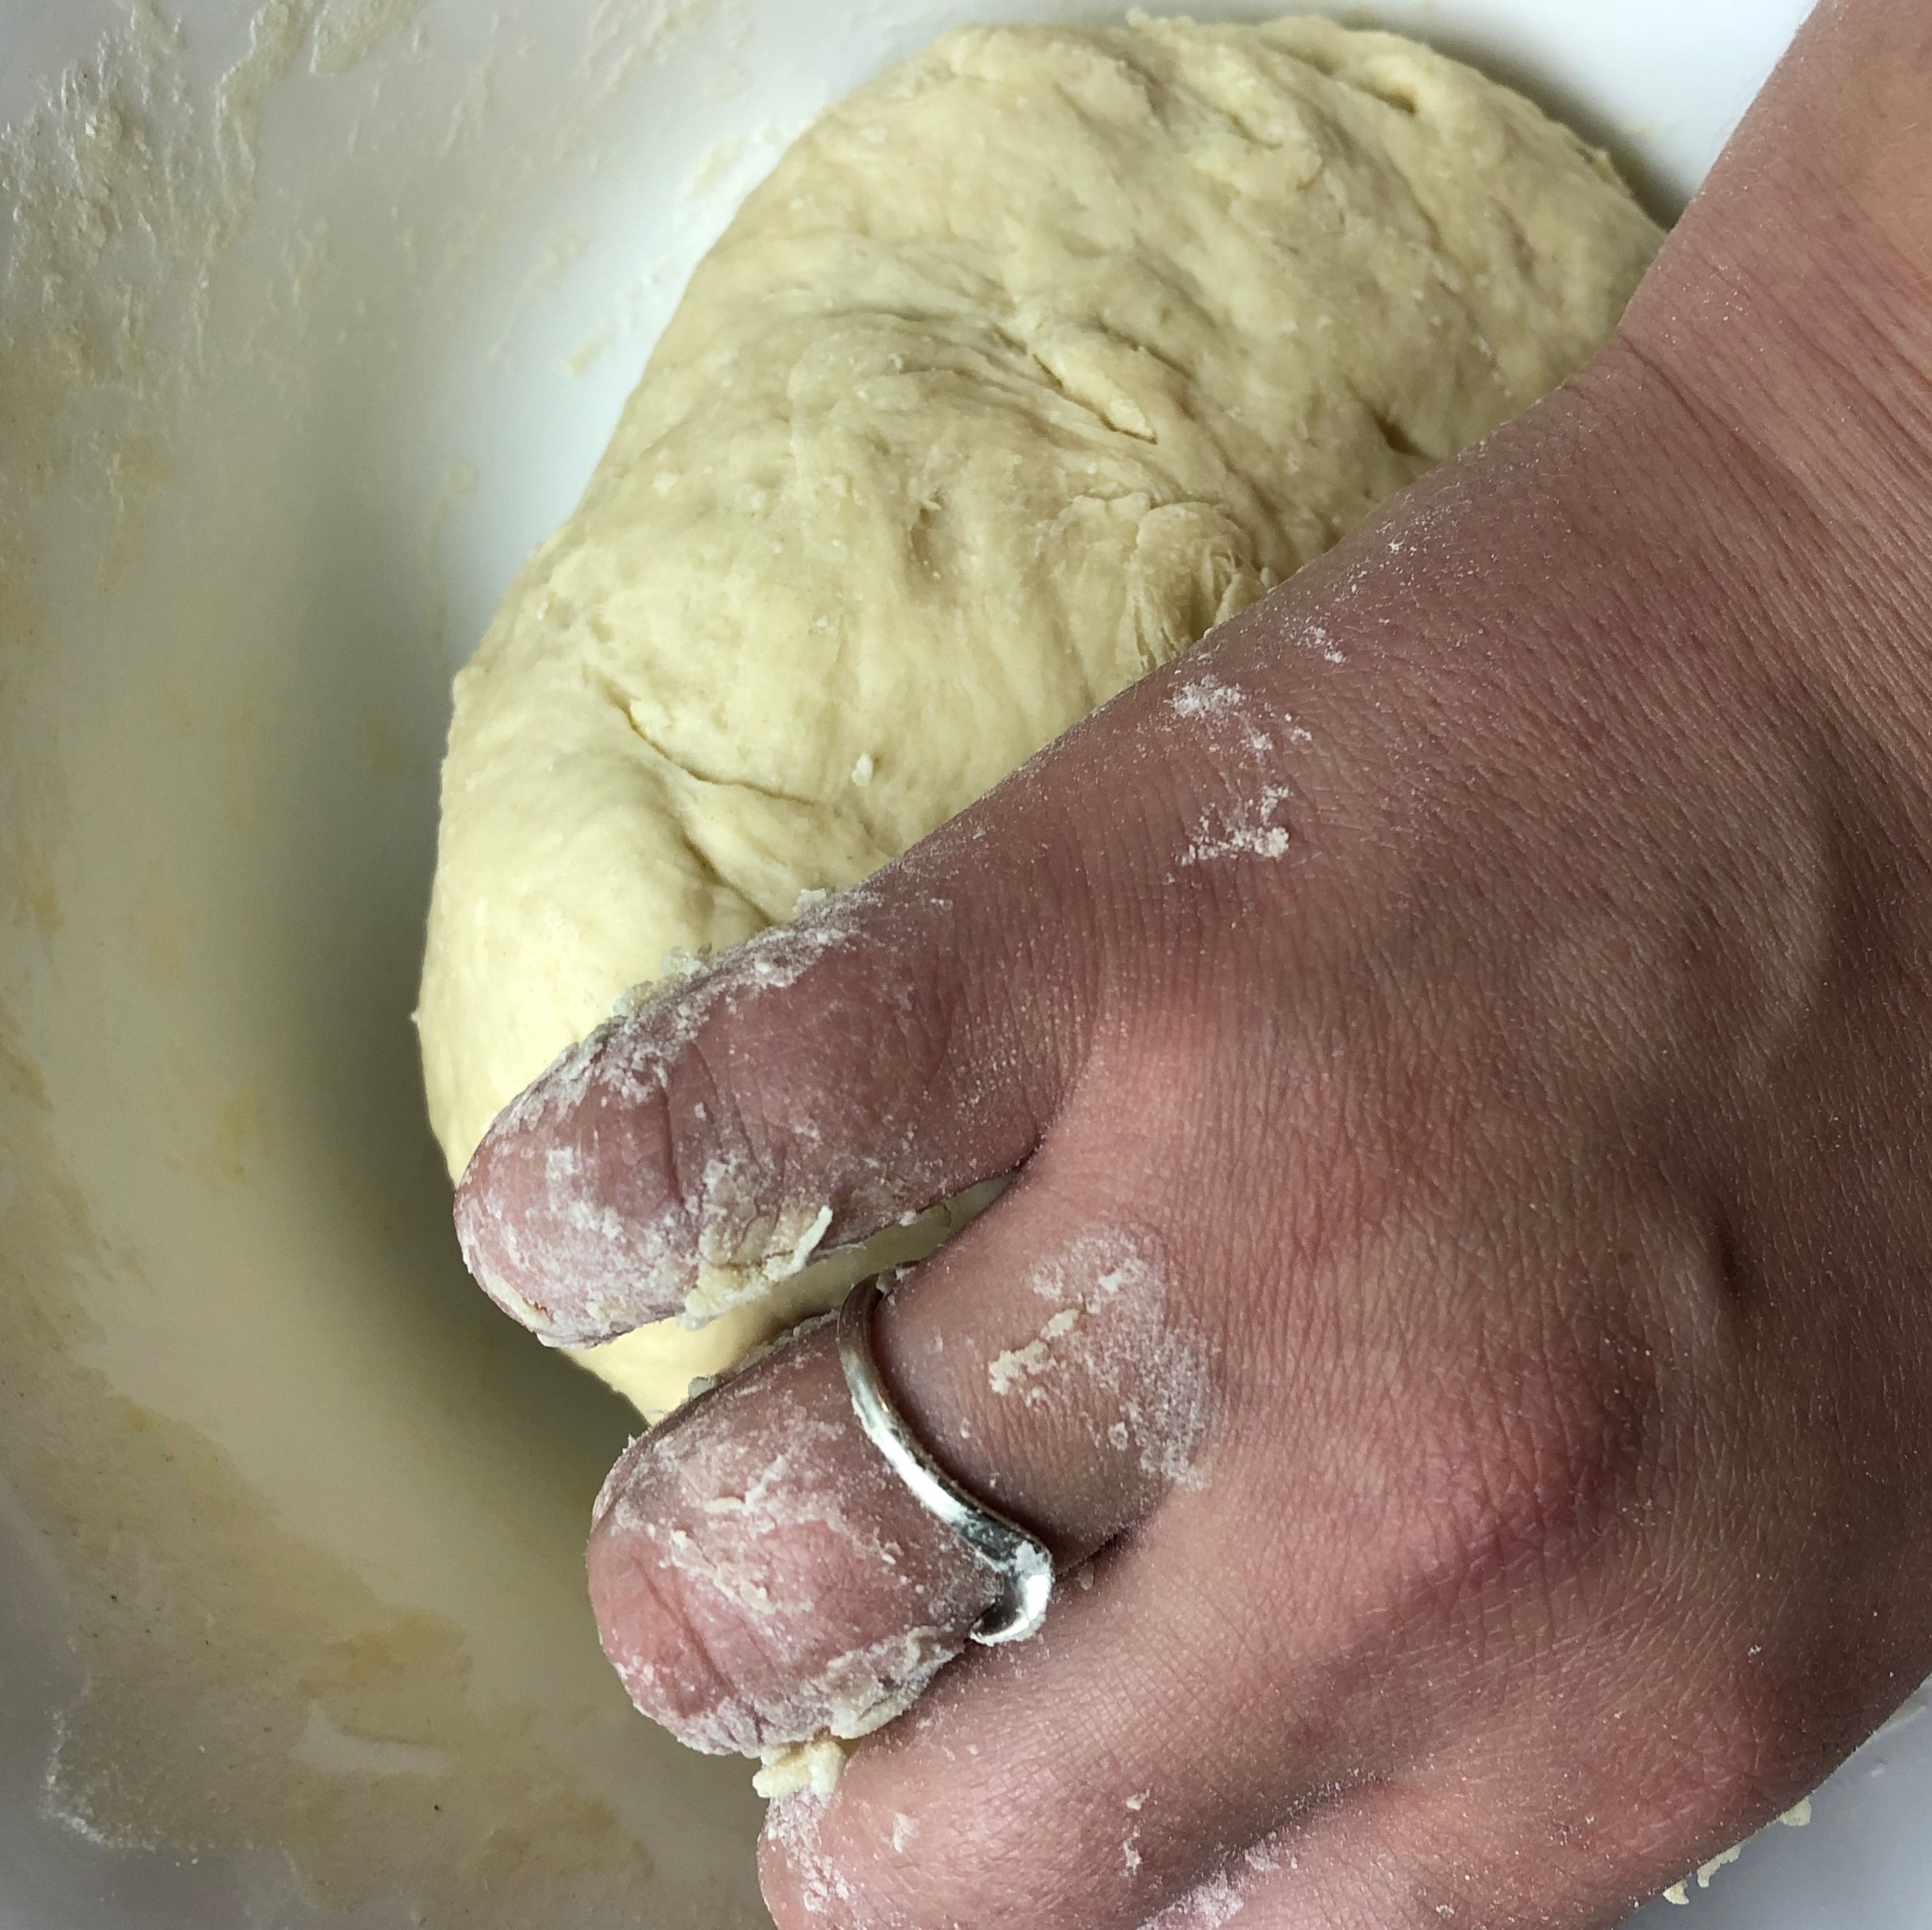 While the meat is being cooked, we start preparing dough for our galnash. In a large bowl, mix flour with egg and water. Knead with hands until a smooth dough forms. Cover with a kitchen towel and set aside for 15-20 minutes.